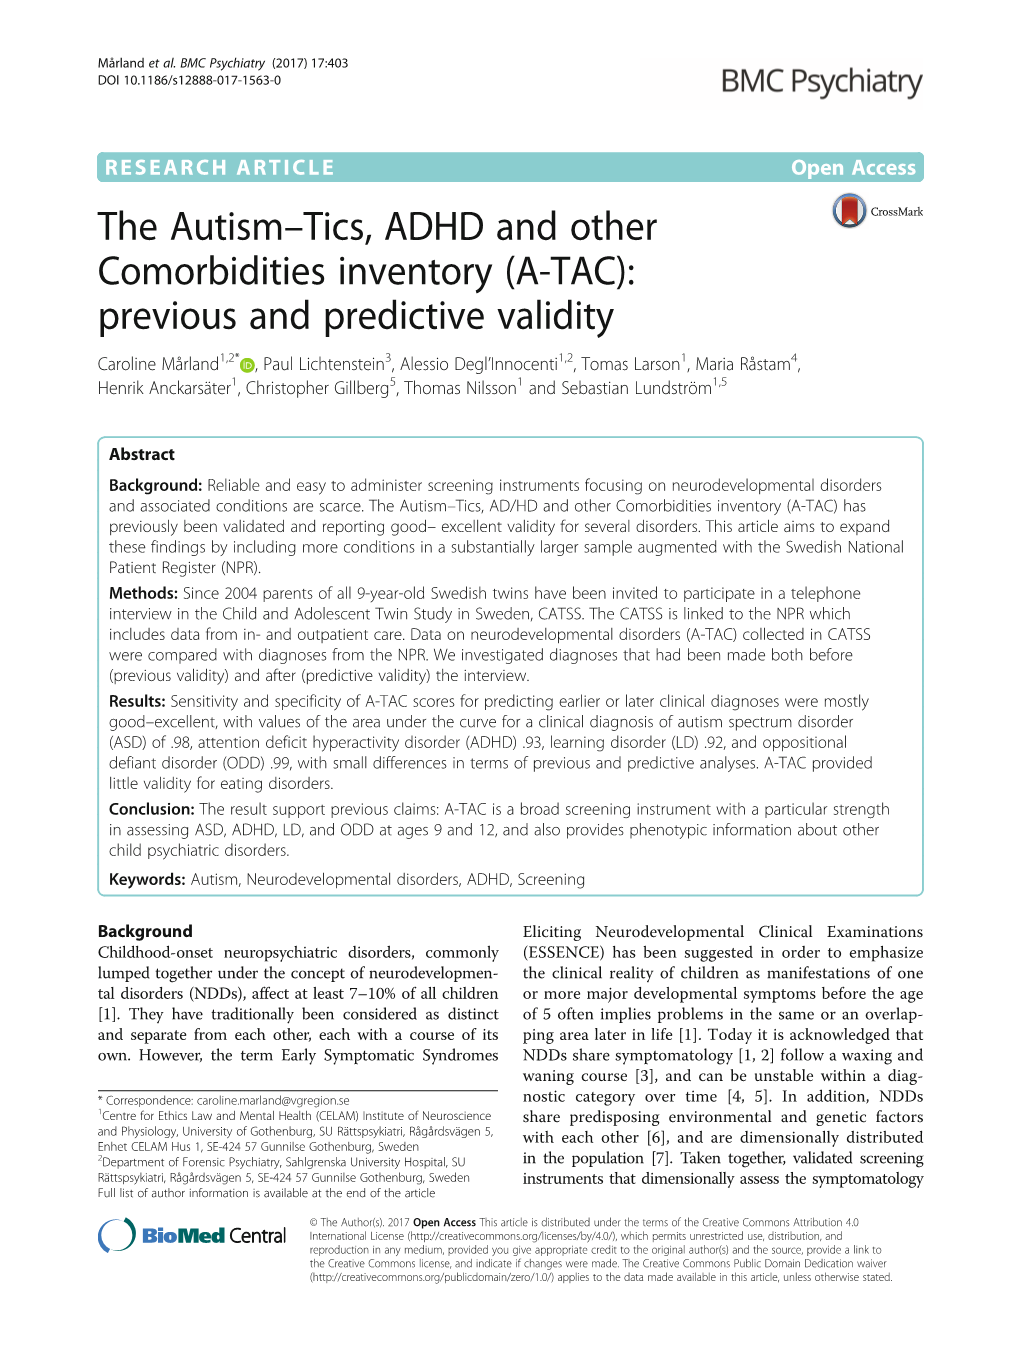 The Autism–Tics, ADHD and Other Comorbidities